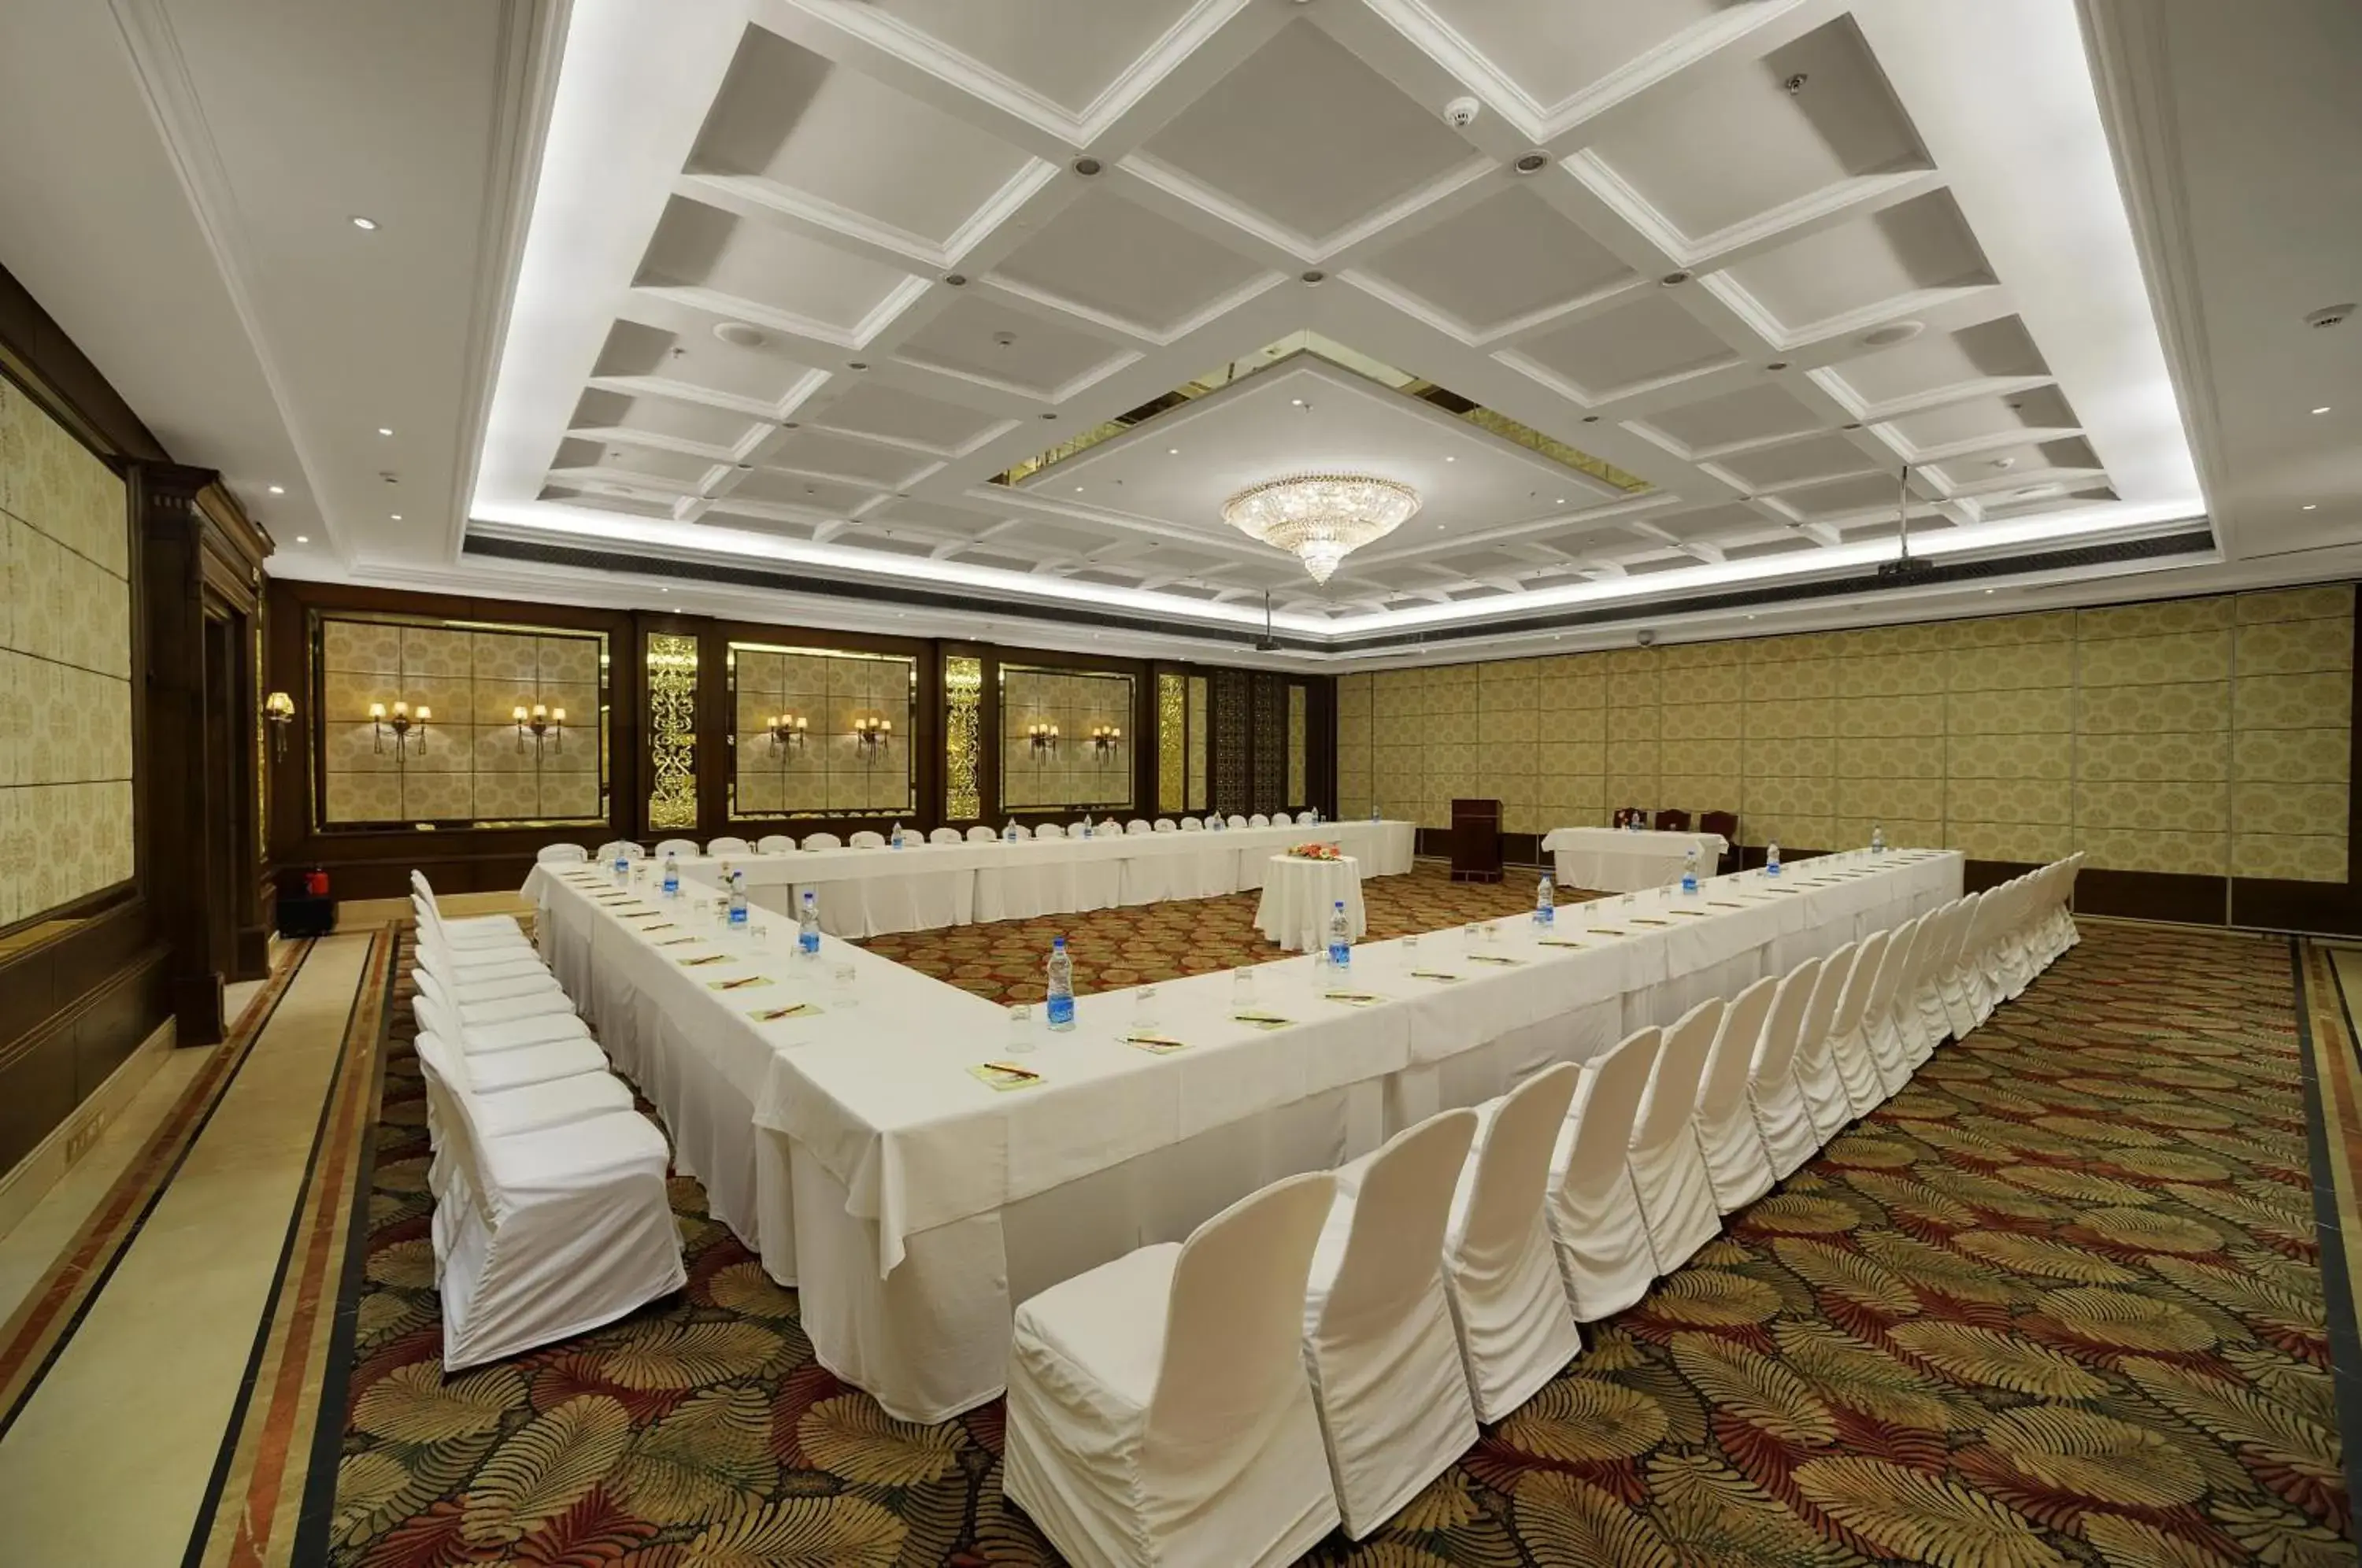 Meeting/conference room in Mayfair Convention